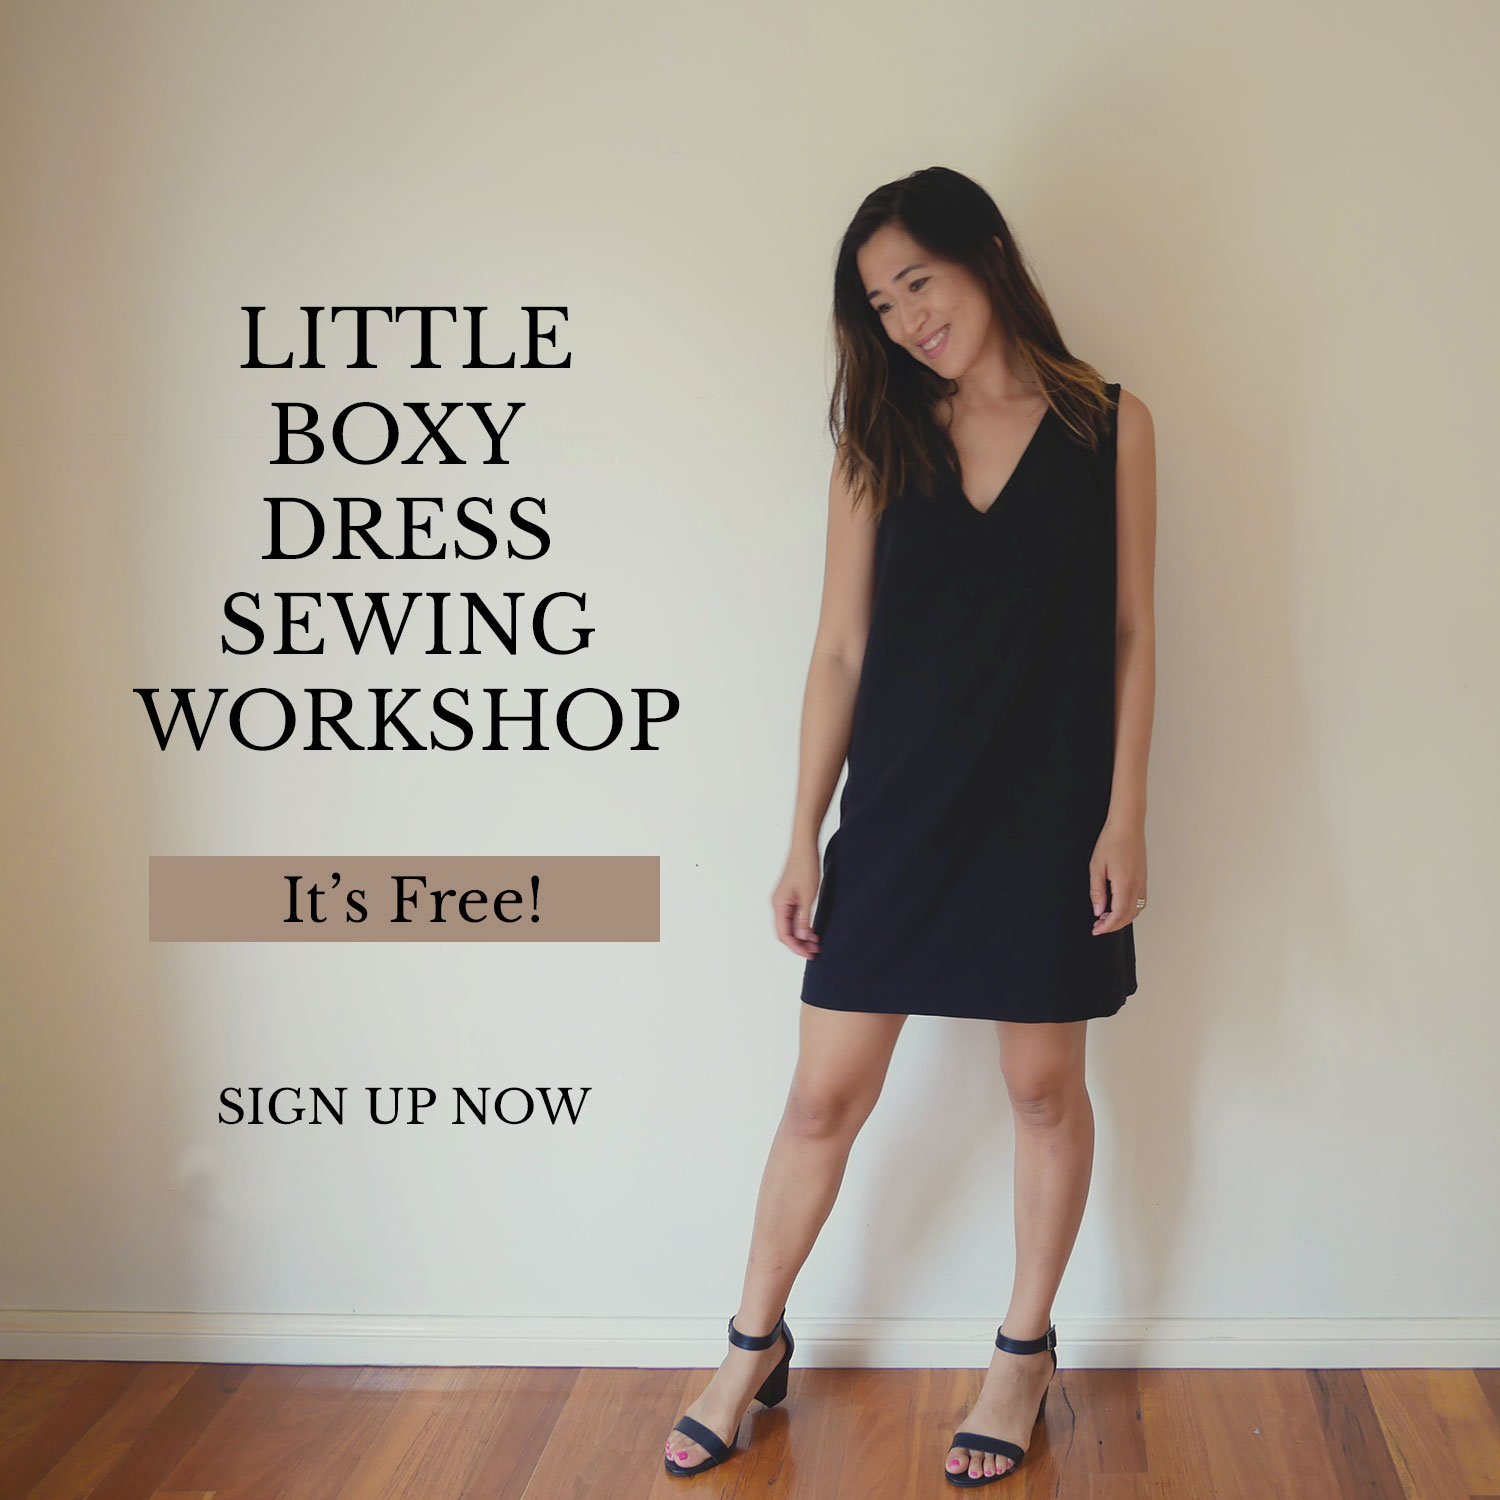 Shirt Dress Sewing Patterns: 9 Timeless Designs - Sew in Love